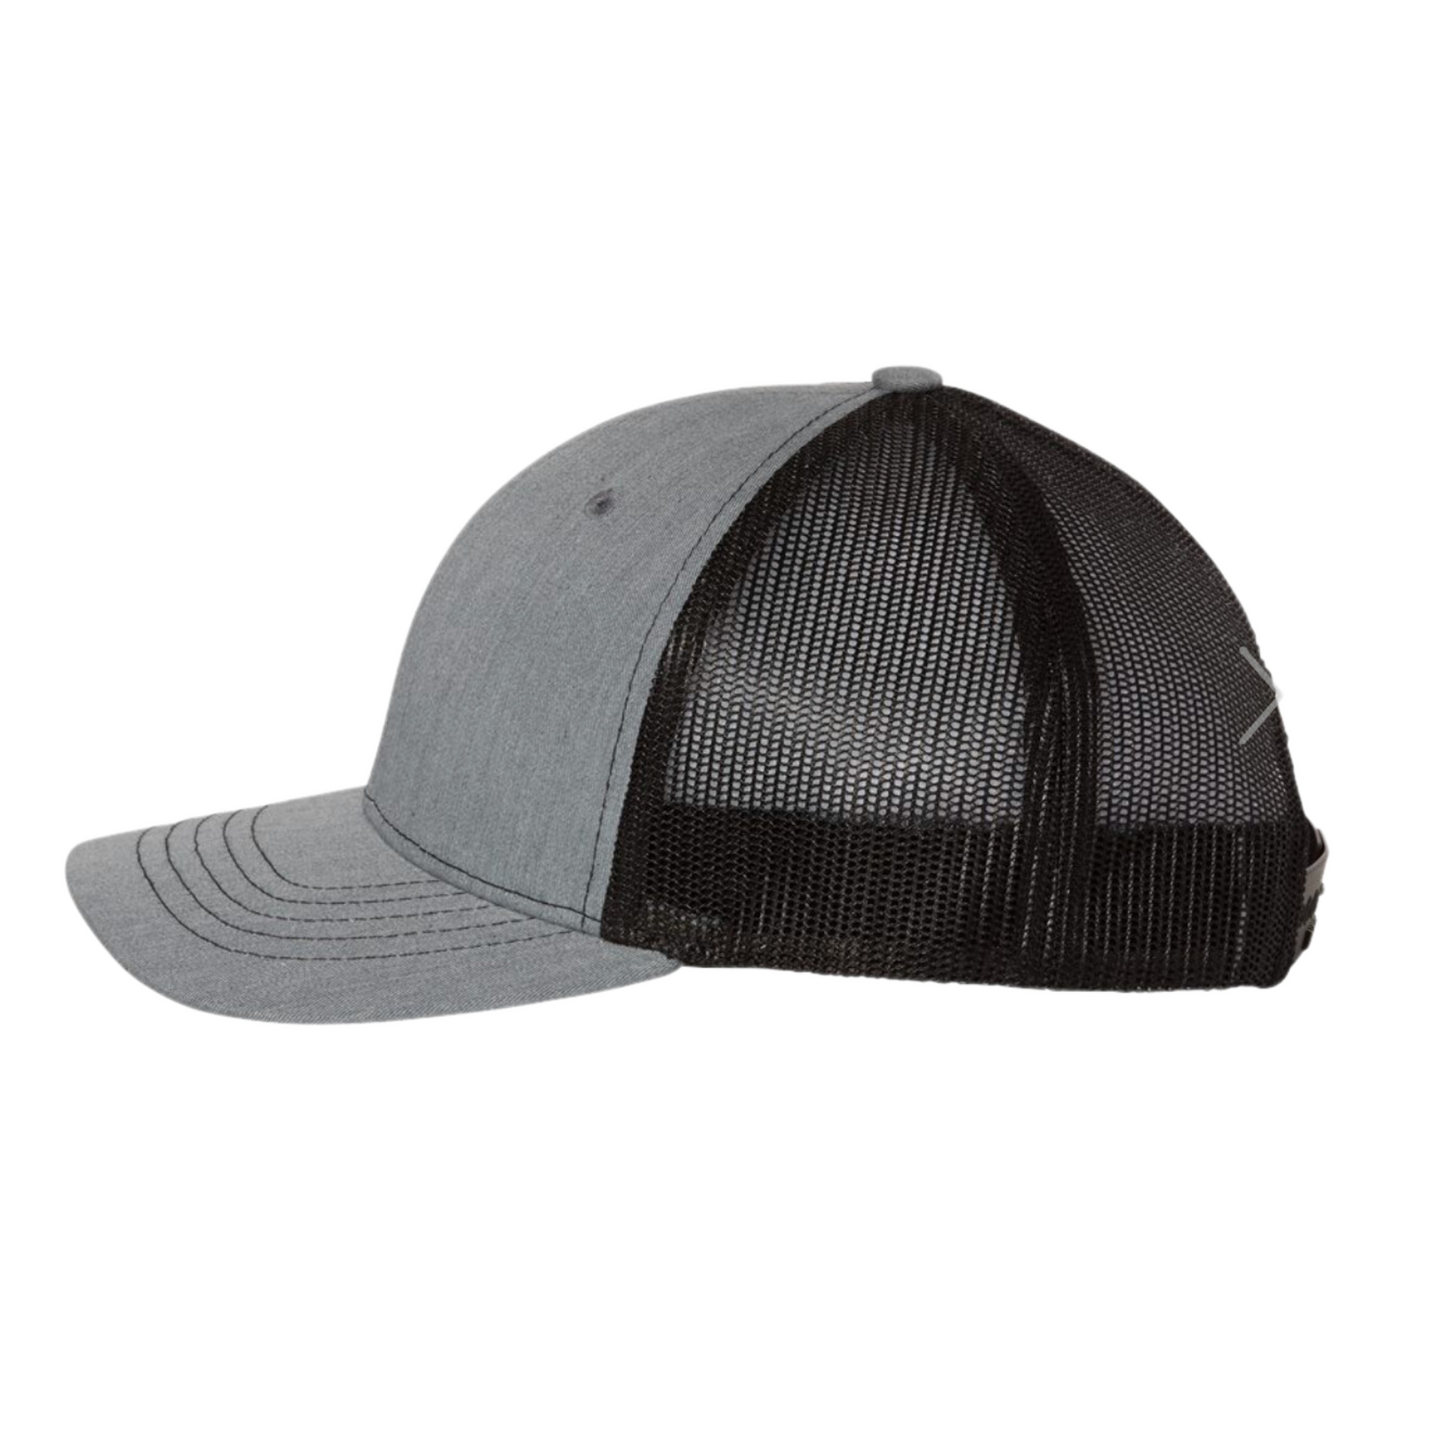 YOUTH ADJUSTABLE UNION GANG LEATHER PATCH HAT